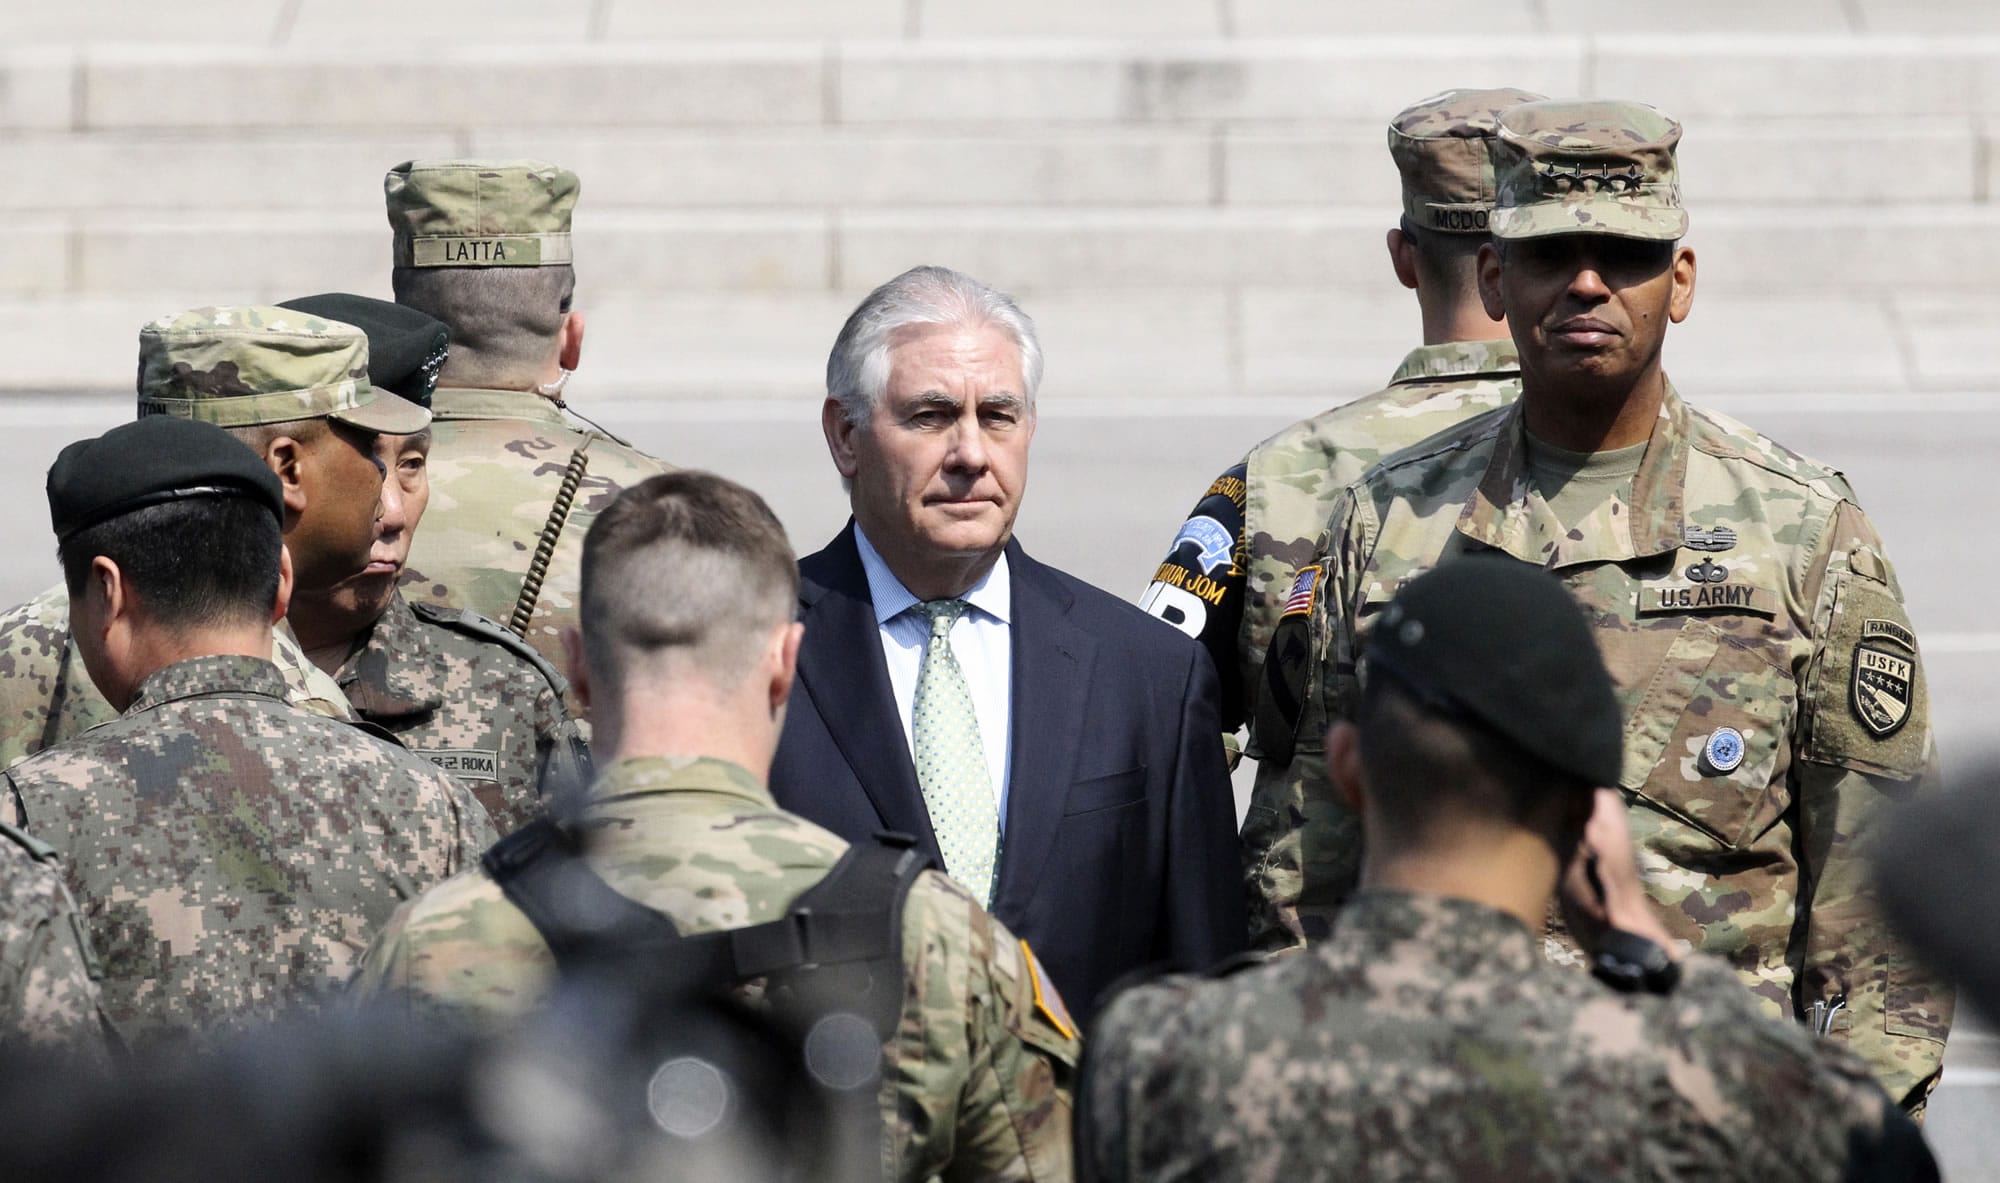 U.S. Secretary of State Rex Tillerson, center, visits with U.S. Gen. Vincent K. Brooks, commander of the United Nations Command, Combined Forces Command and United States Forces Korea, right, at the border village of Panmunjom, which has separated the two Koreas since the Korean War, South Korea, Friday, March 17, 2017.